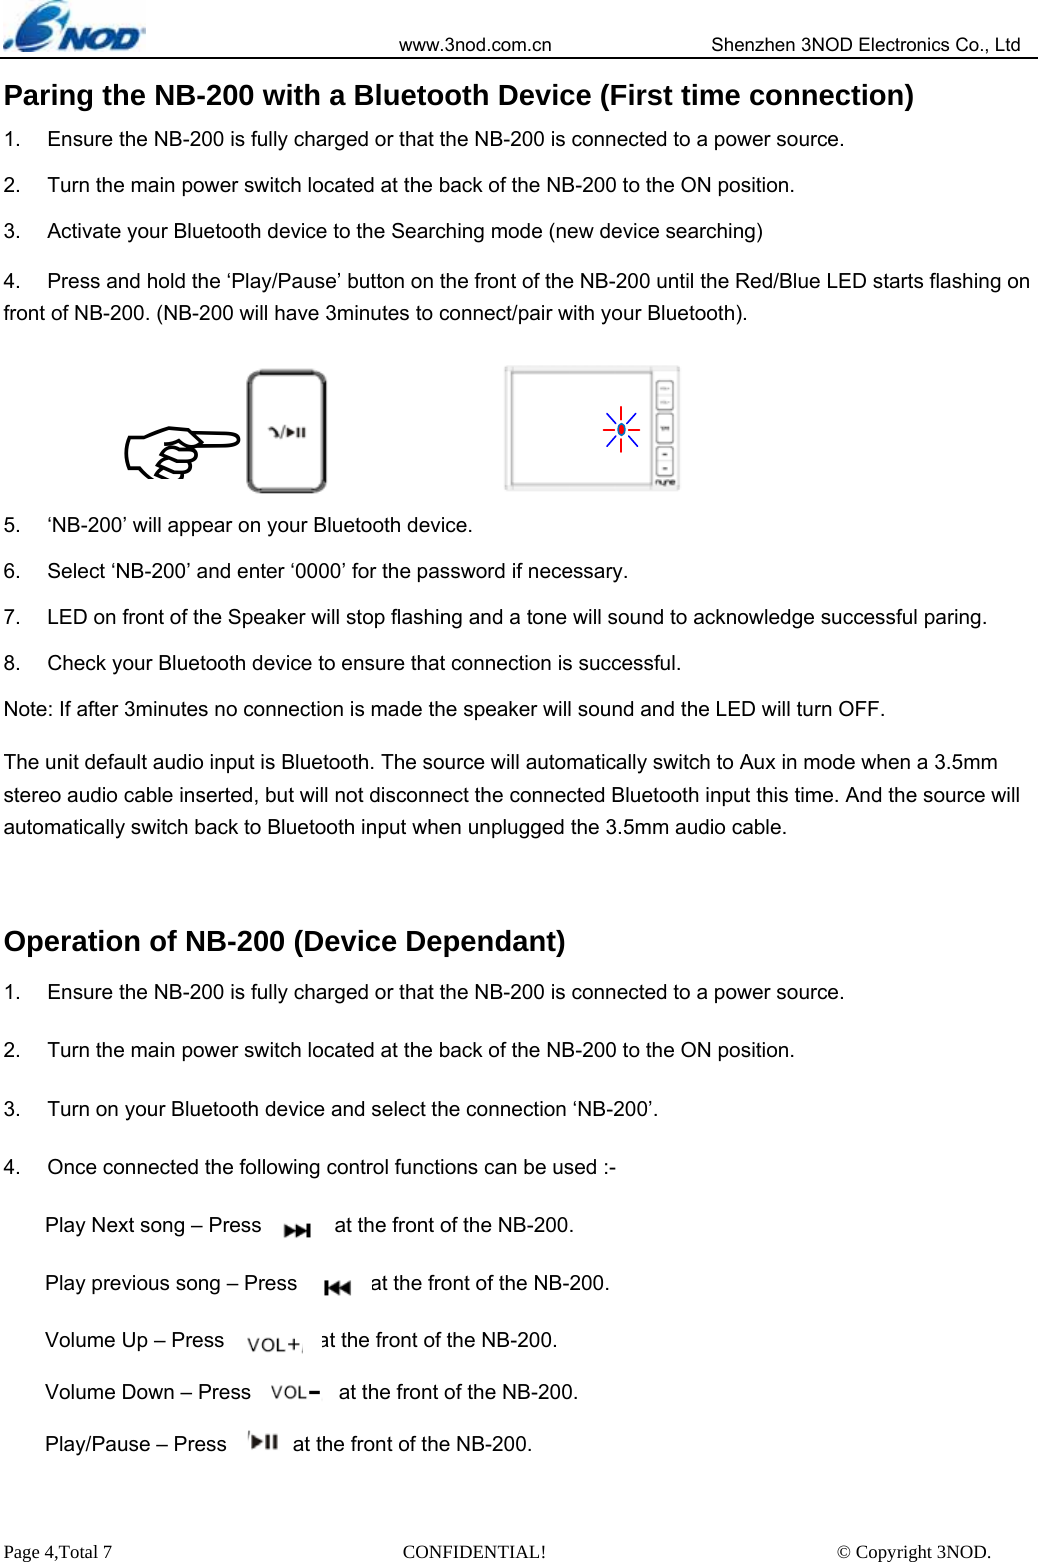                            www.3nod.com.cn                  Shenzhen 3NOD Electronics Co., Ltd Page 4,Total 7                               CONFIDENTIAL!                               © Copyright 3NOD. Paring the NB-200 with a Bluetooth Device (First time connection) 1.  Ensure the NB-200 is fully charged or that the NB-200 is connected to a power source. 2.  Turn the main power switch located at the back of the NB-200 to the ON position. 3.  Activate your Bluetooth device to the Searching mode (new device searching) 4.  Press and hold the ‘Play/Pause’ button on the front of the NB-200 until the Red/Blue LED starts flashing on front of NB-200. (NB-200 will have 3minutes to connect/pair with your Bluetooth).      5.  ‘NB-200’ will appear on your Bluetooth device. 6.  Select ‘NB-200’ and enter ‘0000’ for the password if necessary. 7.  LED on front of the Speaker will stop flashing and a tone will sound to acknowledge successful paring. 8.  Check your Bluetooth device to ensure that connection is successful. Note: If after 3minutes no connection is made the speaker will sound and the LED will turn OFF.    The unit default audio input is Bluetooth. The source will automatically switch to Aux in mode when a 3.5mm stereo audio cable inserted, but will not disconnect the connected Bluetooth input this time. And the source will automatically switch back to Bluetooth input when unplugged the 3.5mm audio cable.  Operation of NB-200 (Device Dependant) 1.  Ensure the NB-200 is fully charged or that the NB-200 is connected to a power source. 2.  Turn the main power switch located at the back of the NB-200 to the ON position. 3.  Turn on your Bluetooth device and select the connection ‘NB-200’. 4.  Once connected the following control functions can be used :- Play Next song – Press              at the front of the NB-200. Play previous song – Press              at the front of the NB-200. Volume Up – Press              at the front of the NB-200. Volume Down – Press                 at the front of the NB-200. Play/Pause – Press      at the front of the NB-200.   )   